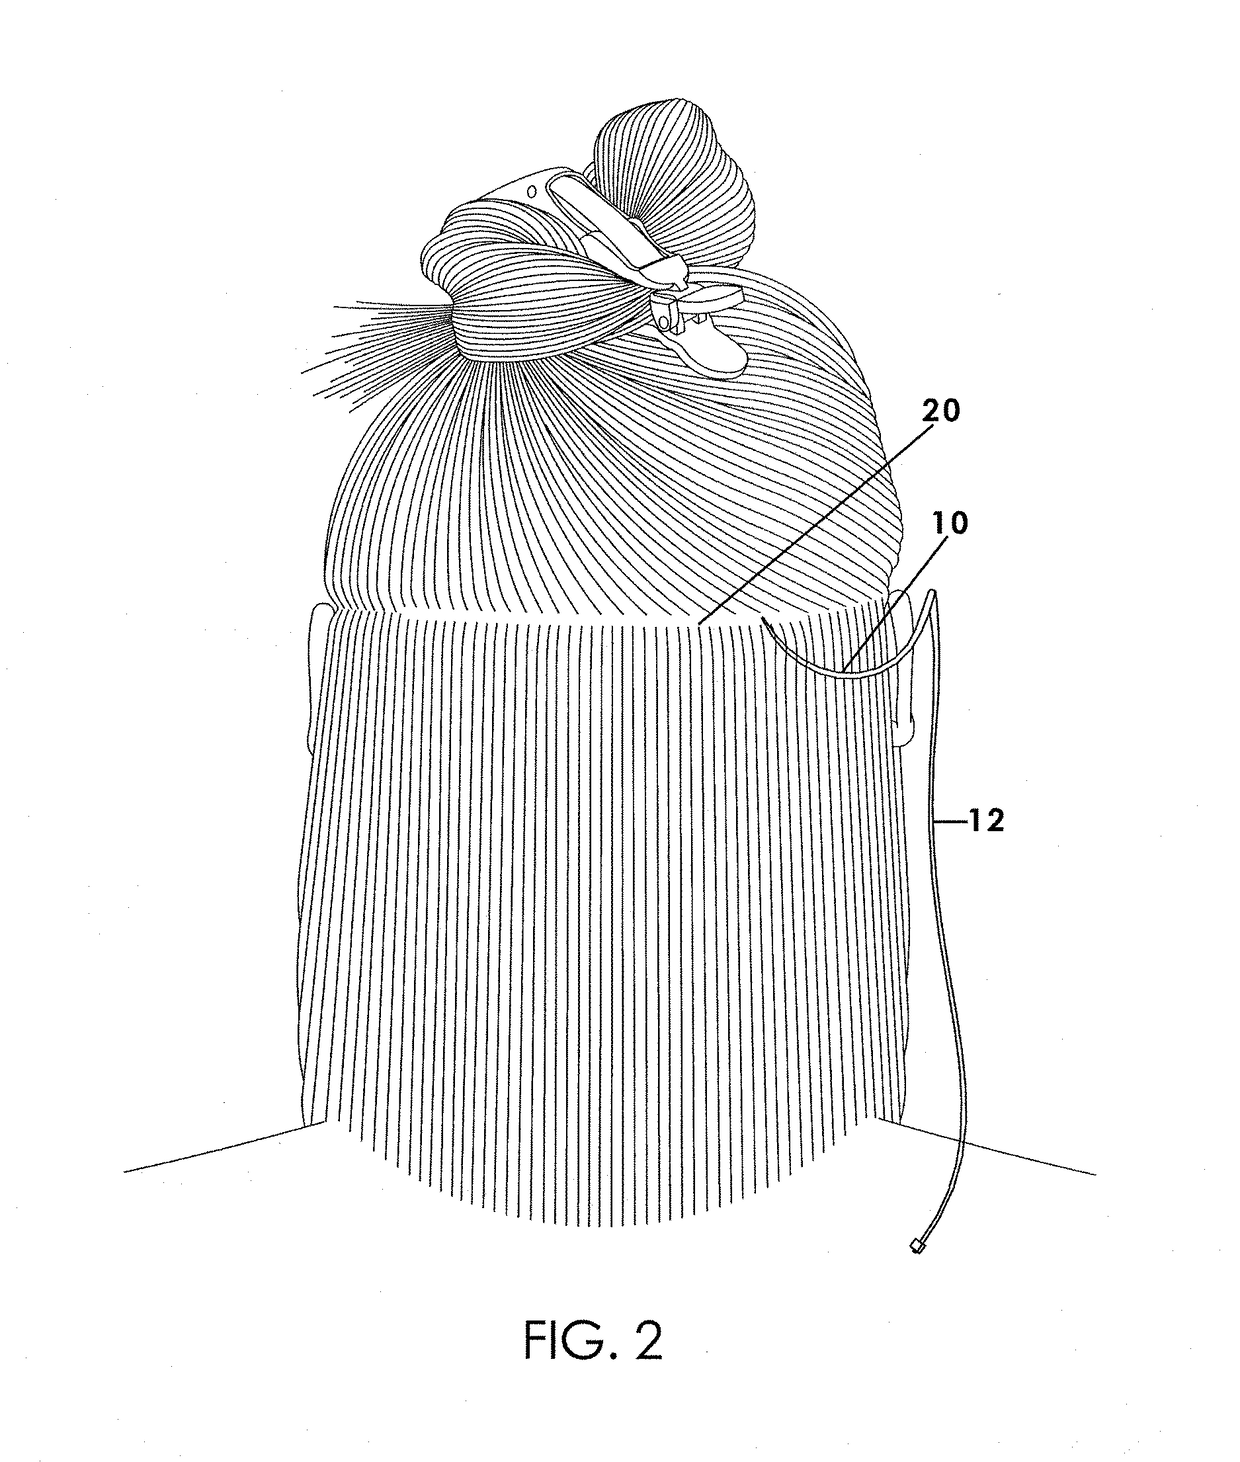 Braidless apparatus and method of combining natural and artificial hair